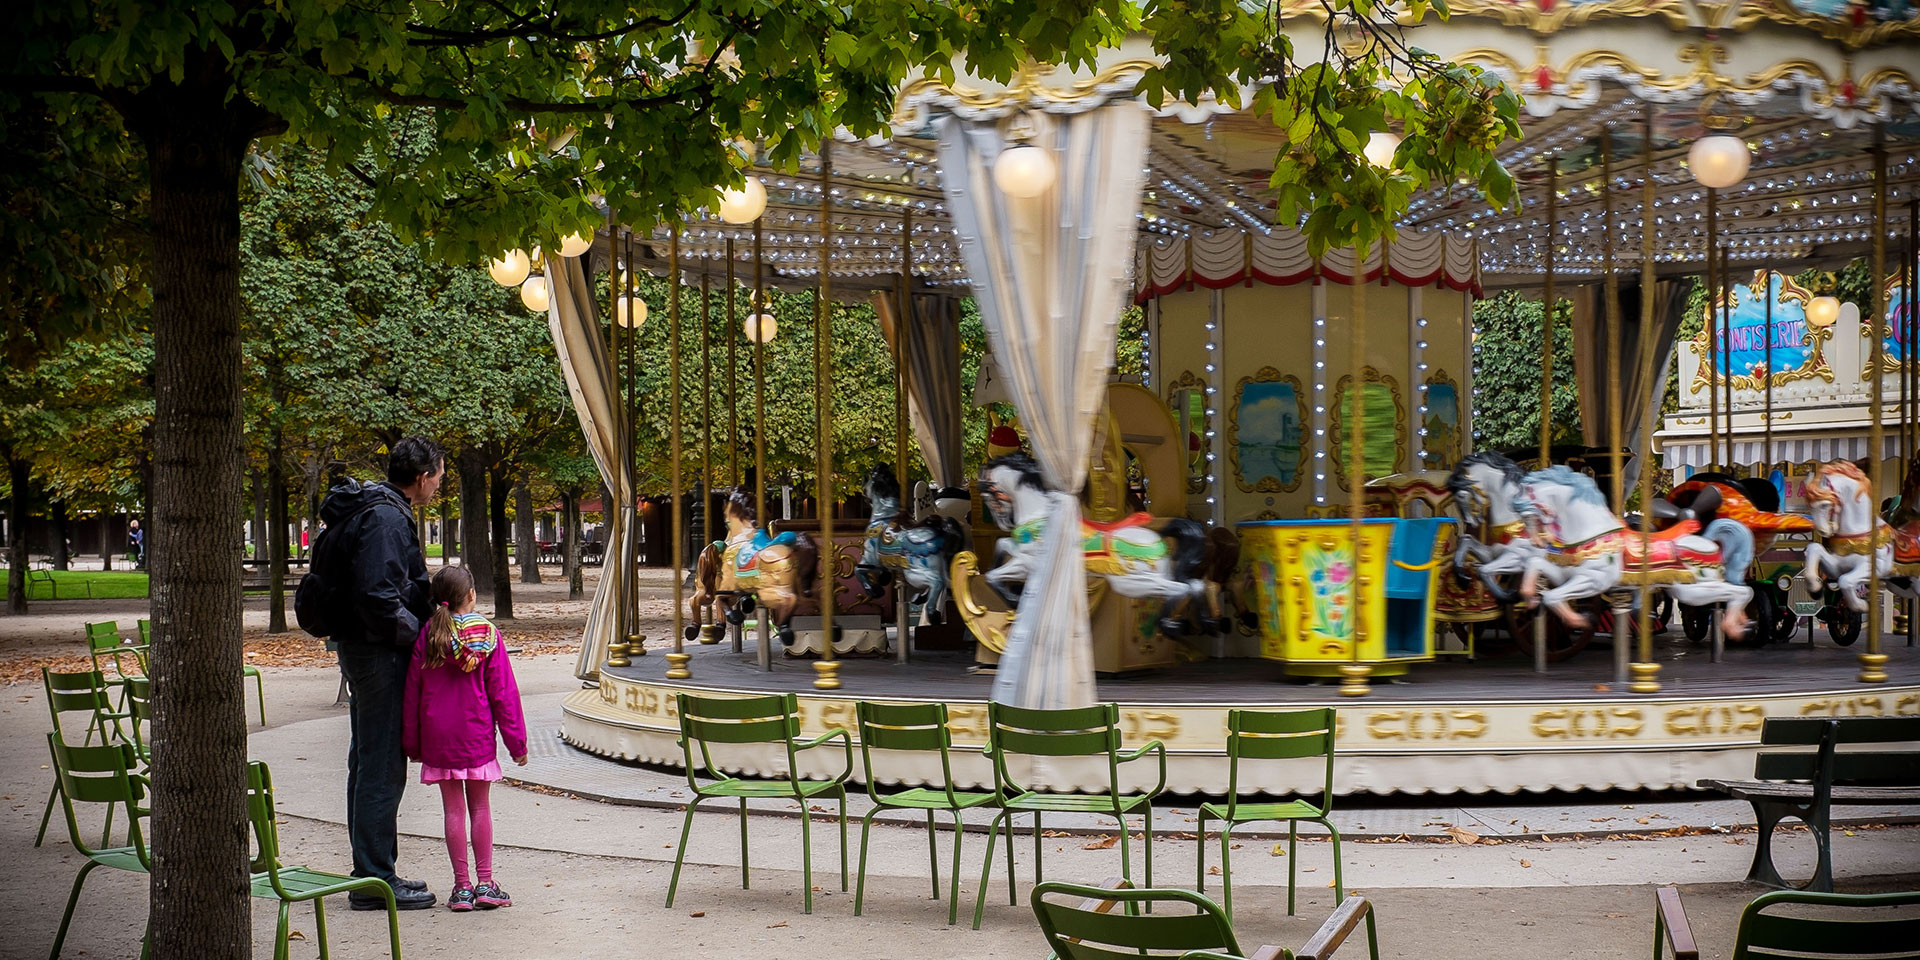 Visiting Paris with Kids? Here Are 4 Offbeat Spots “Les Enfants” Will Love